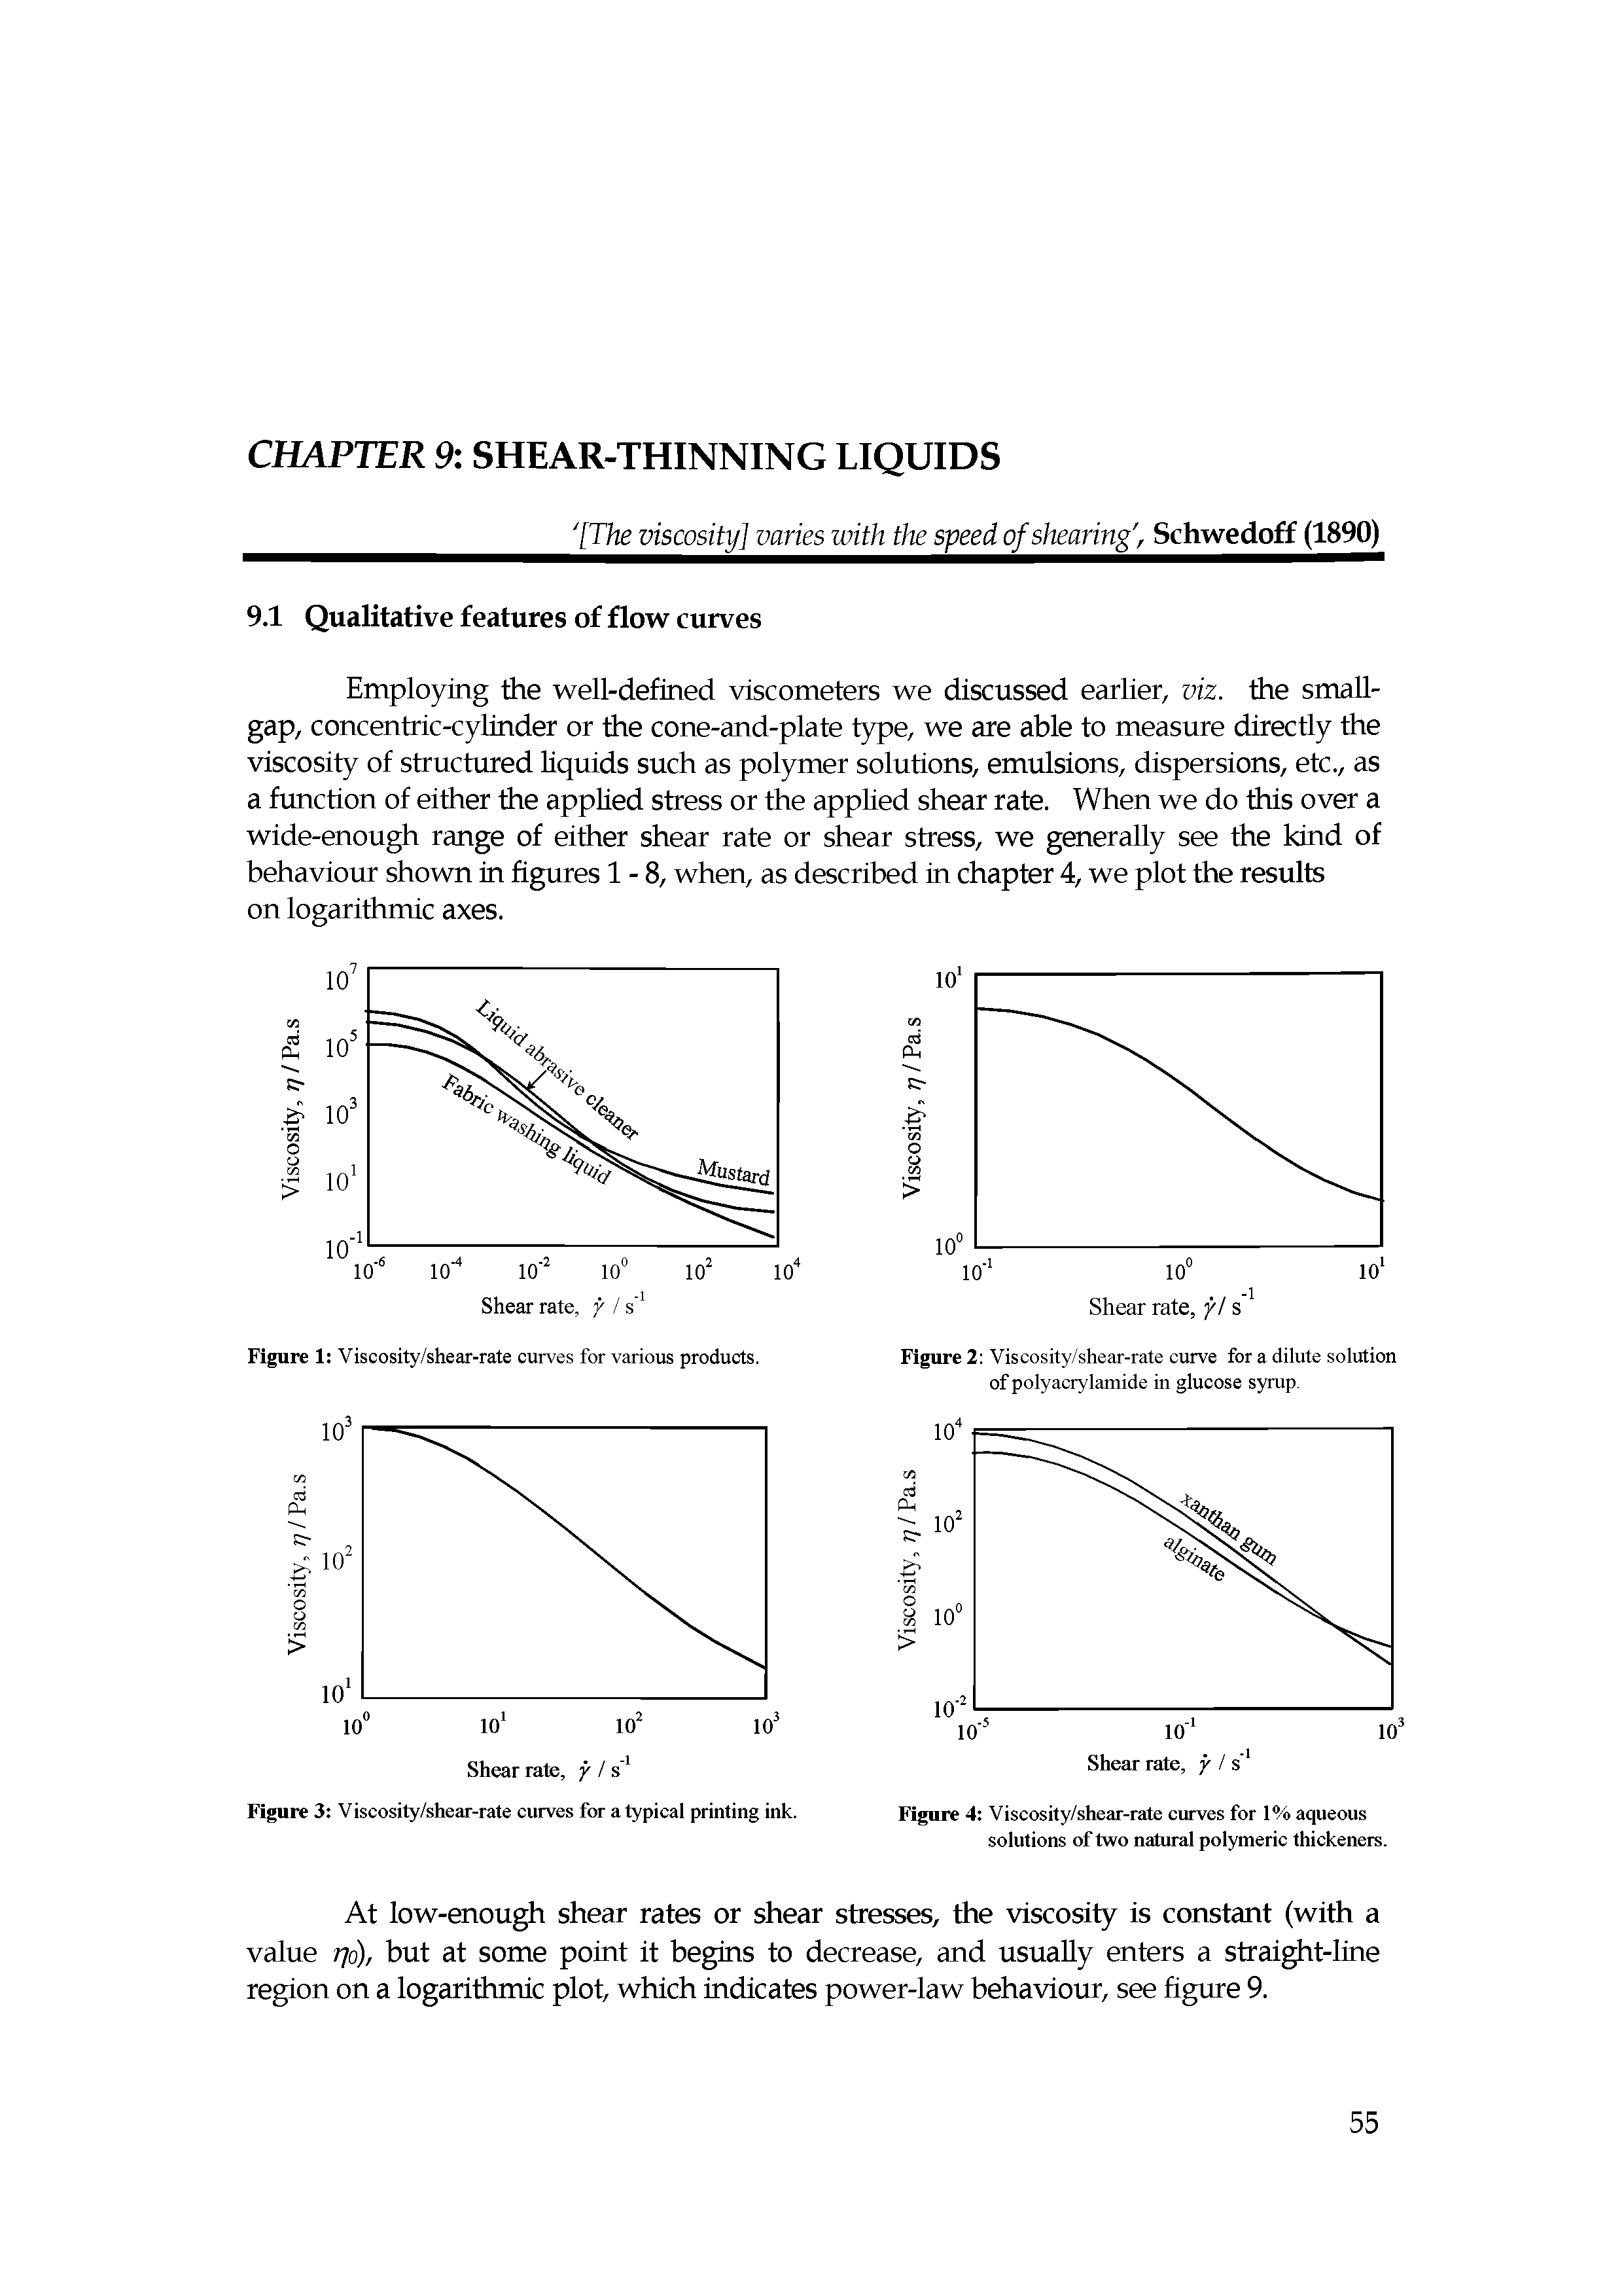 Figure 4 Viscosity/shear-rate curves for 1% aqueous solutions of two natural polymeric thickeners.